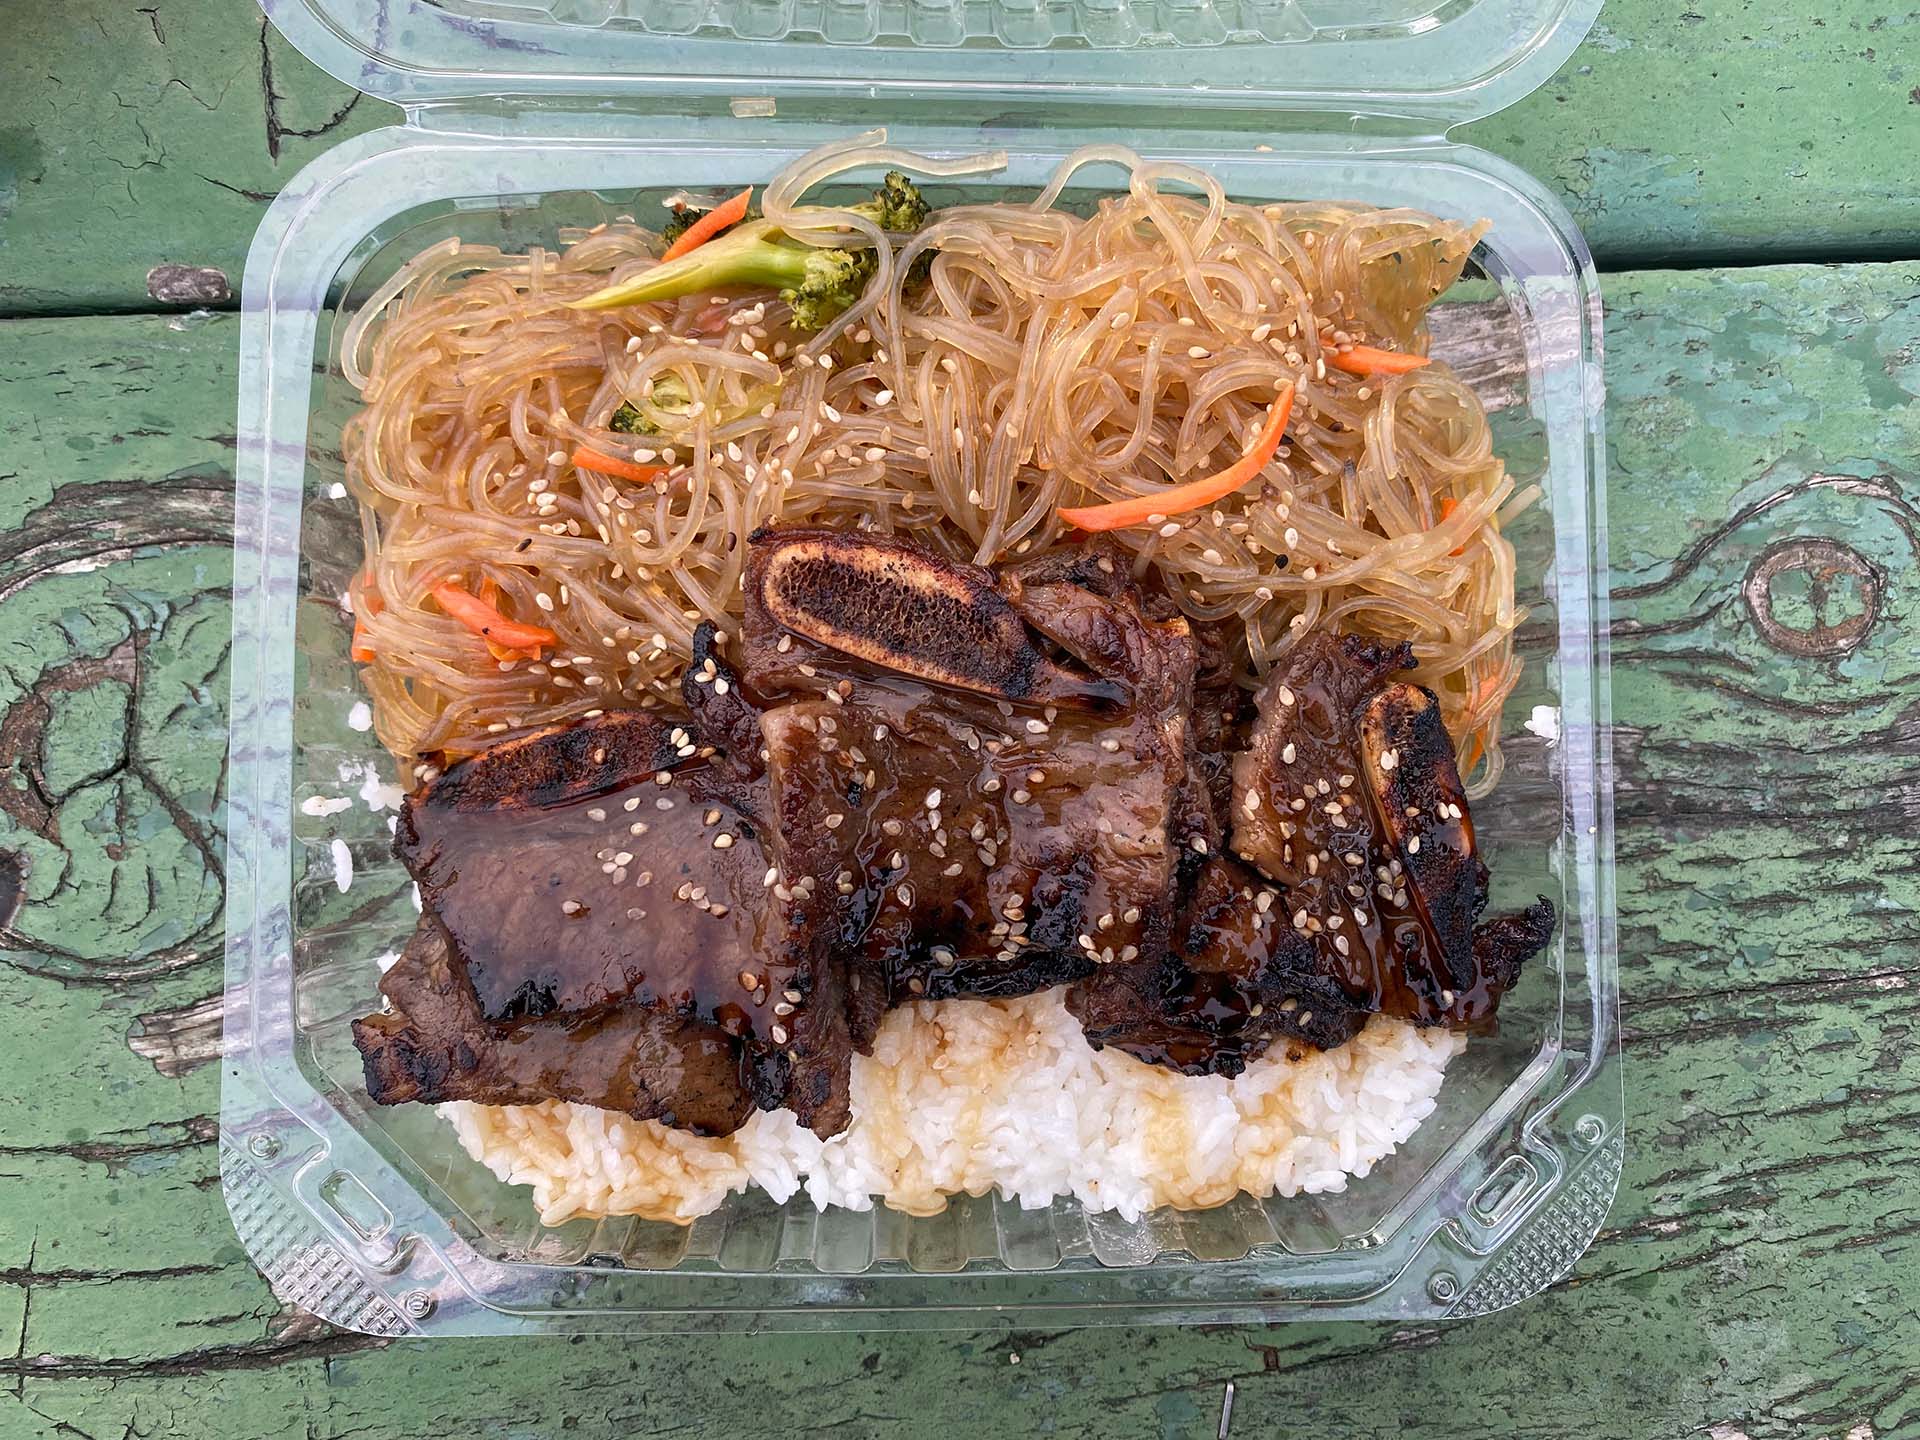 Korean barbecue beef short rib served over rice and japchae (noodles) in a plastic takeout container.